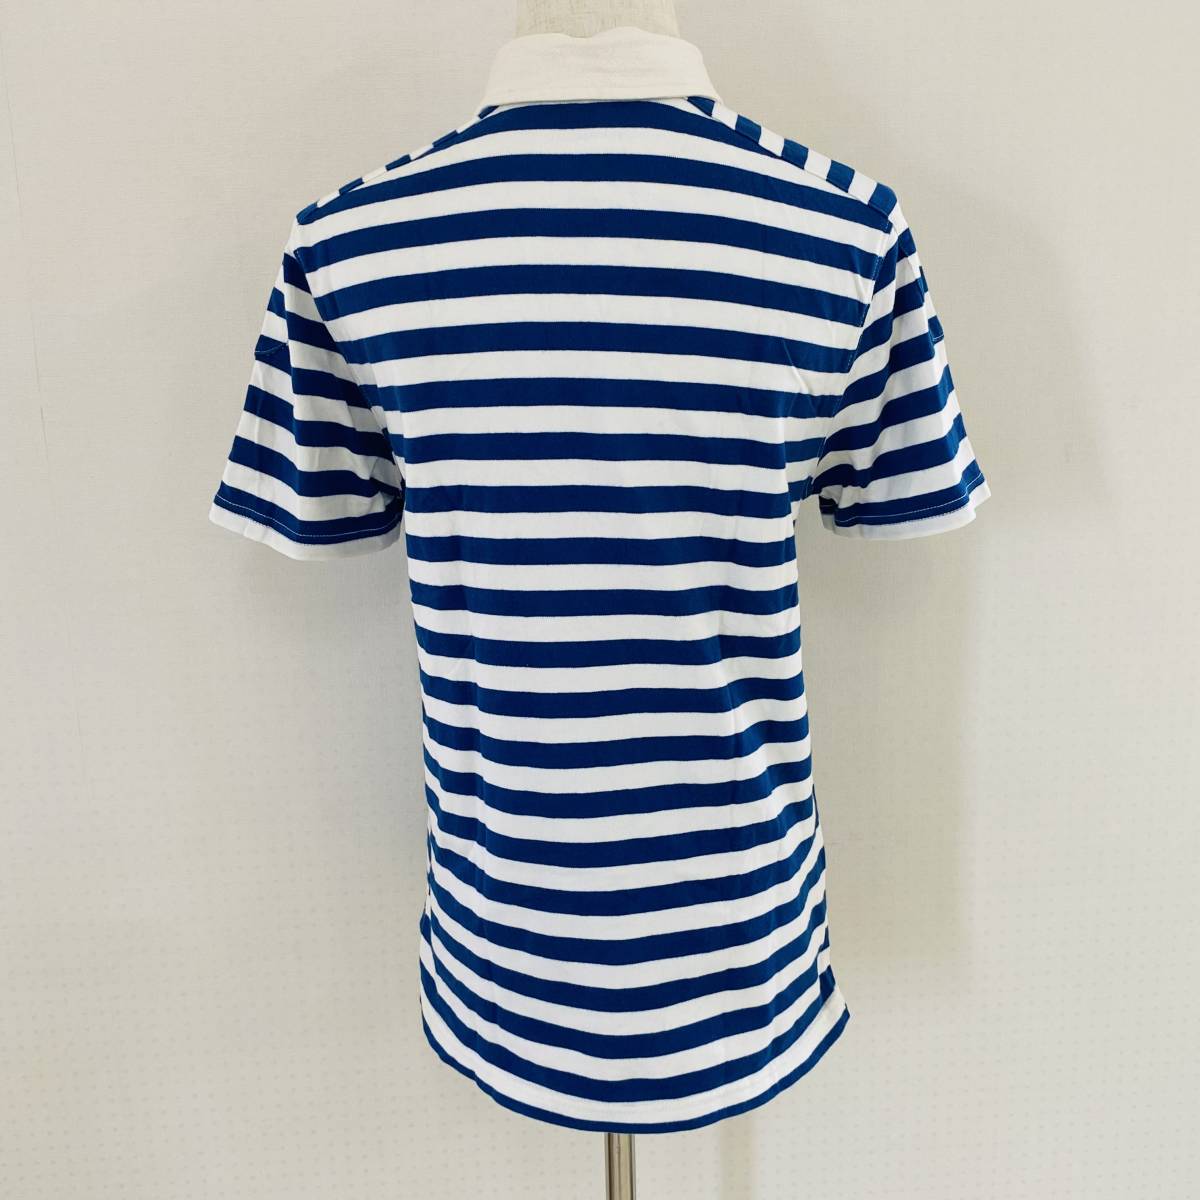 AS0031 GAP Gap lady's polo-shirt short sleeves casual XS blue border cotton 100% all-purpose summer sport сhick style blue white border 